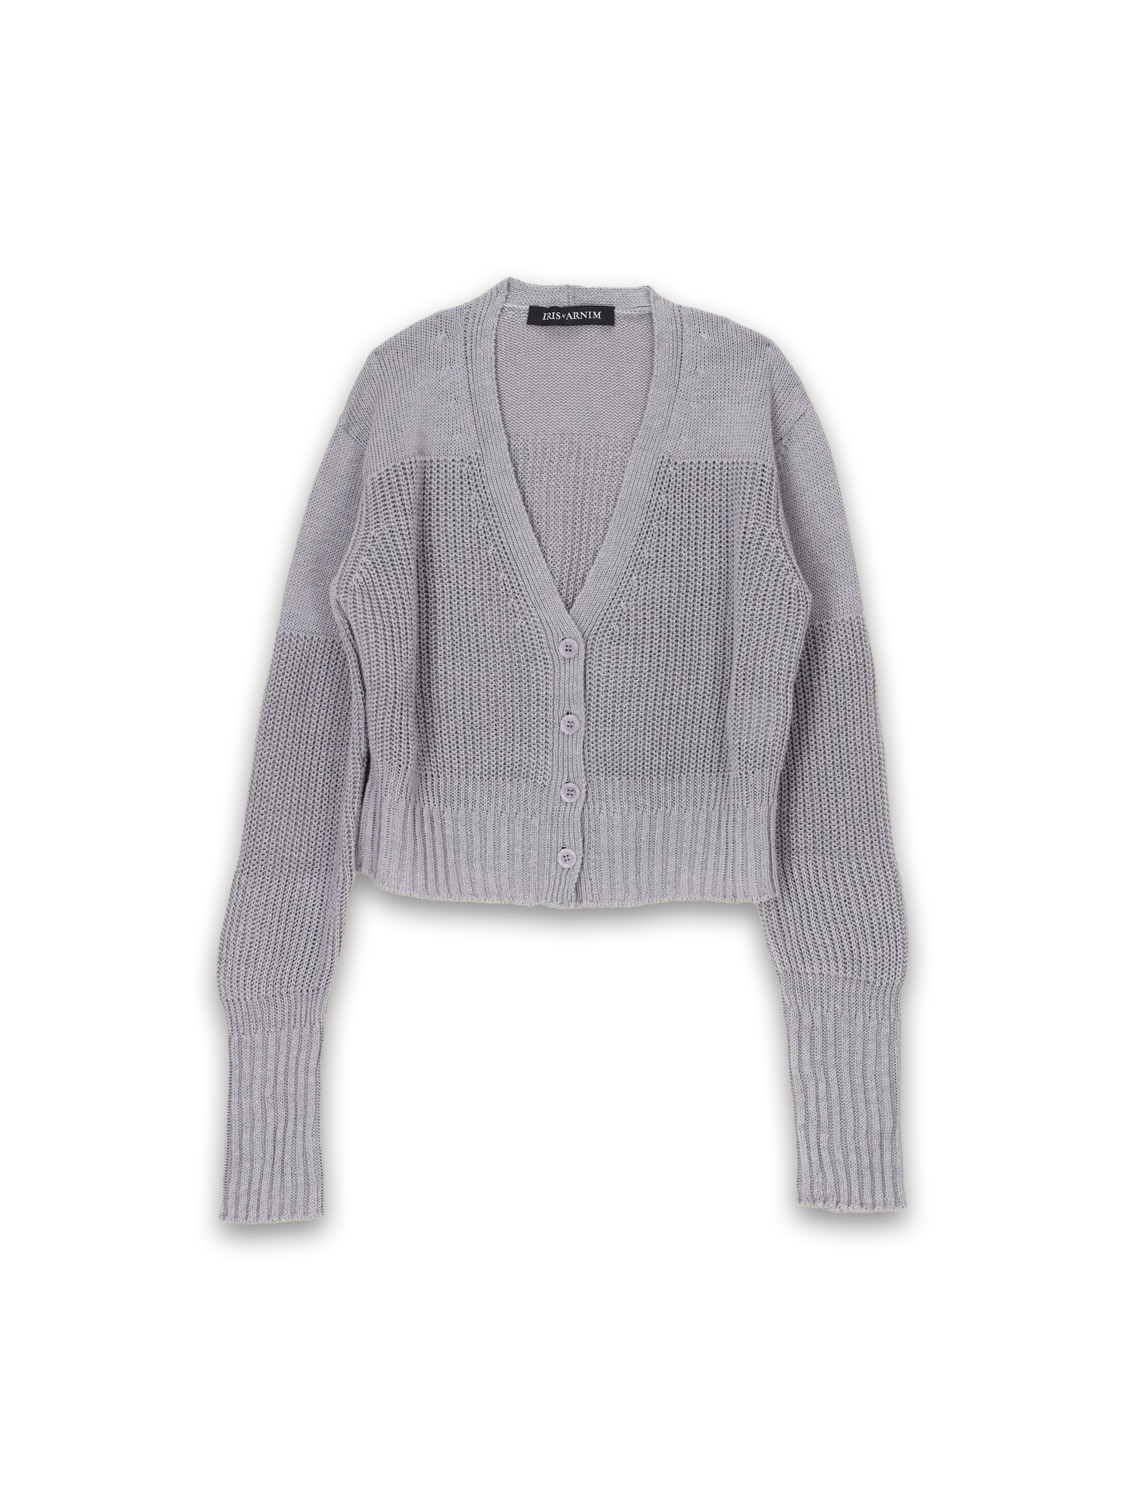 Iphigenie – Short cardigan made from a linen-cotton mix 